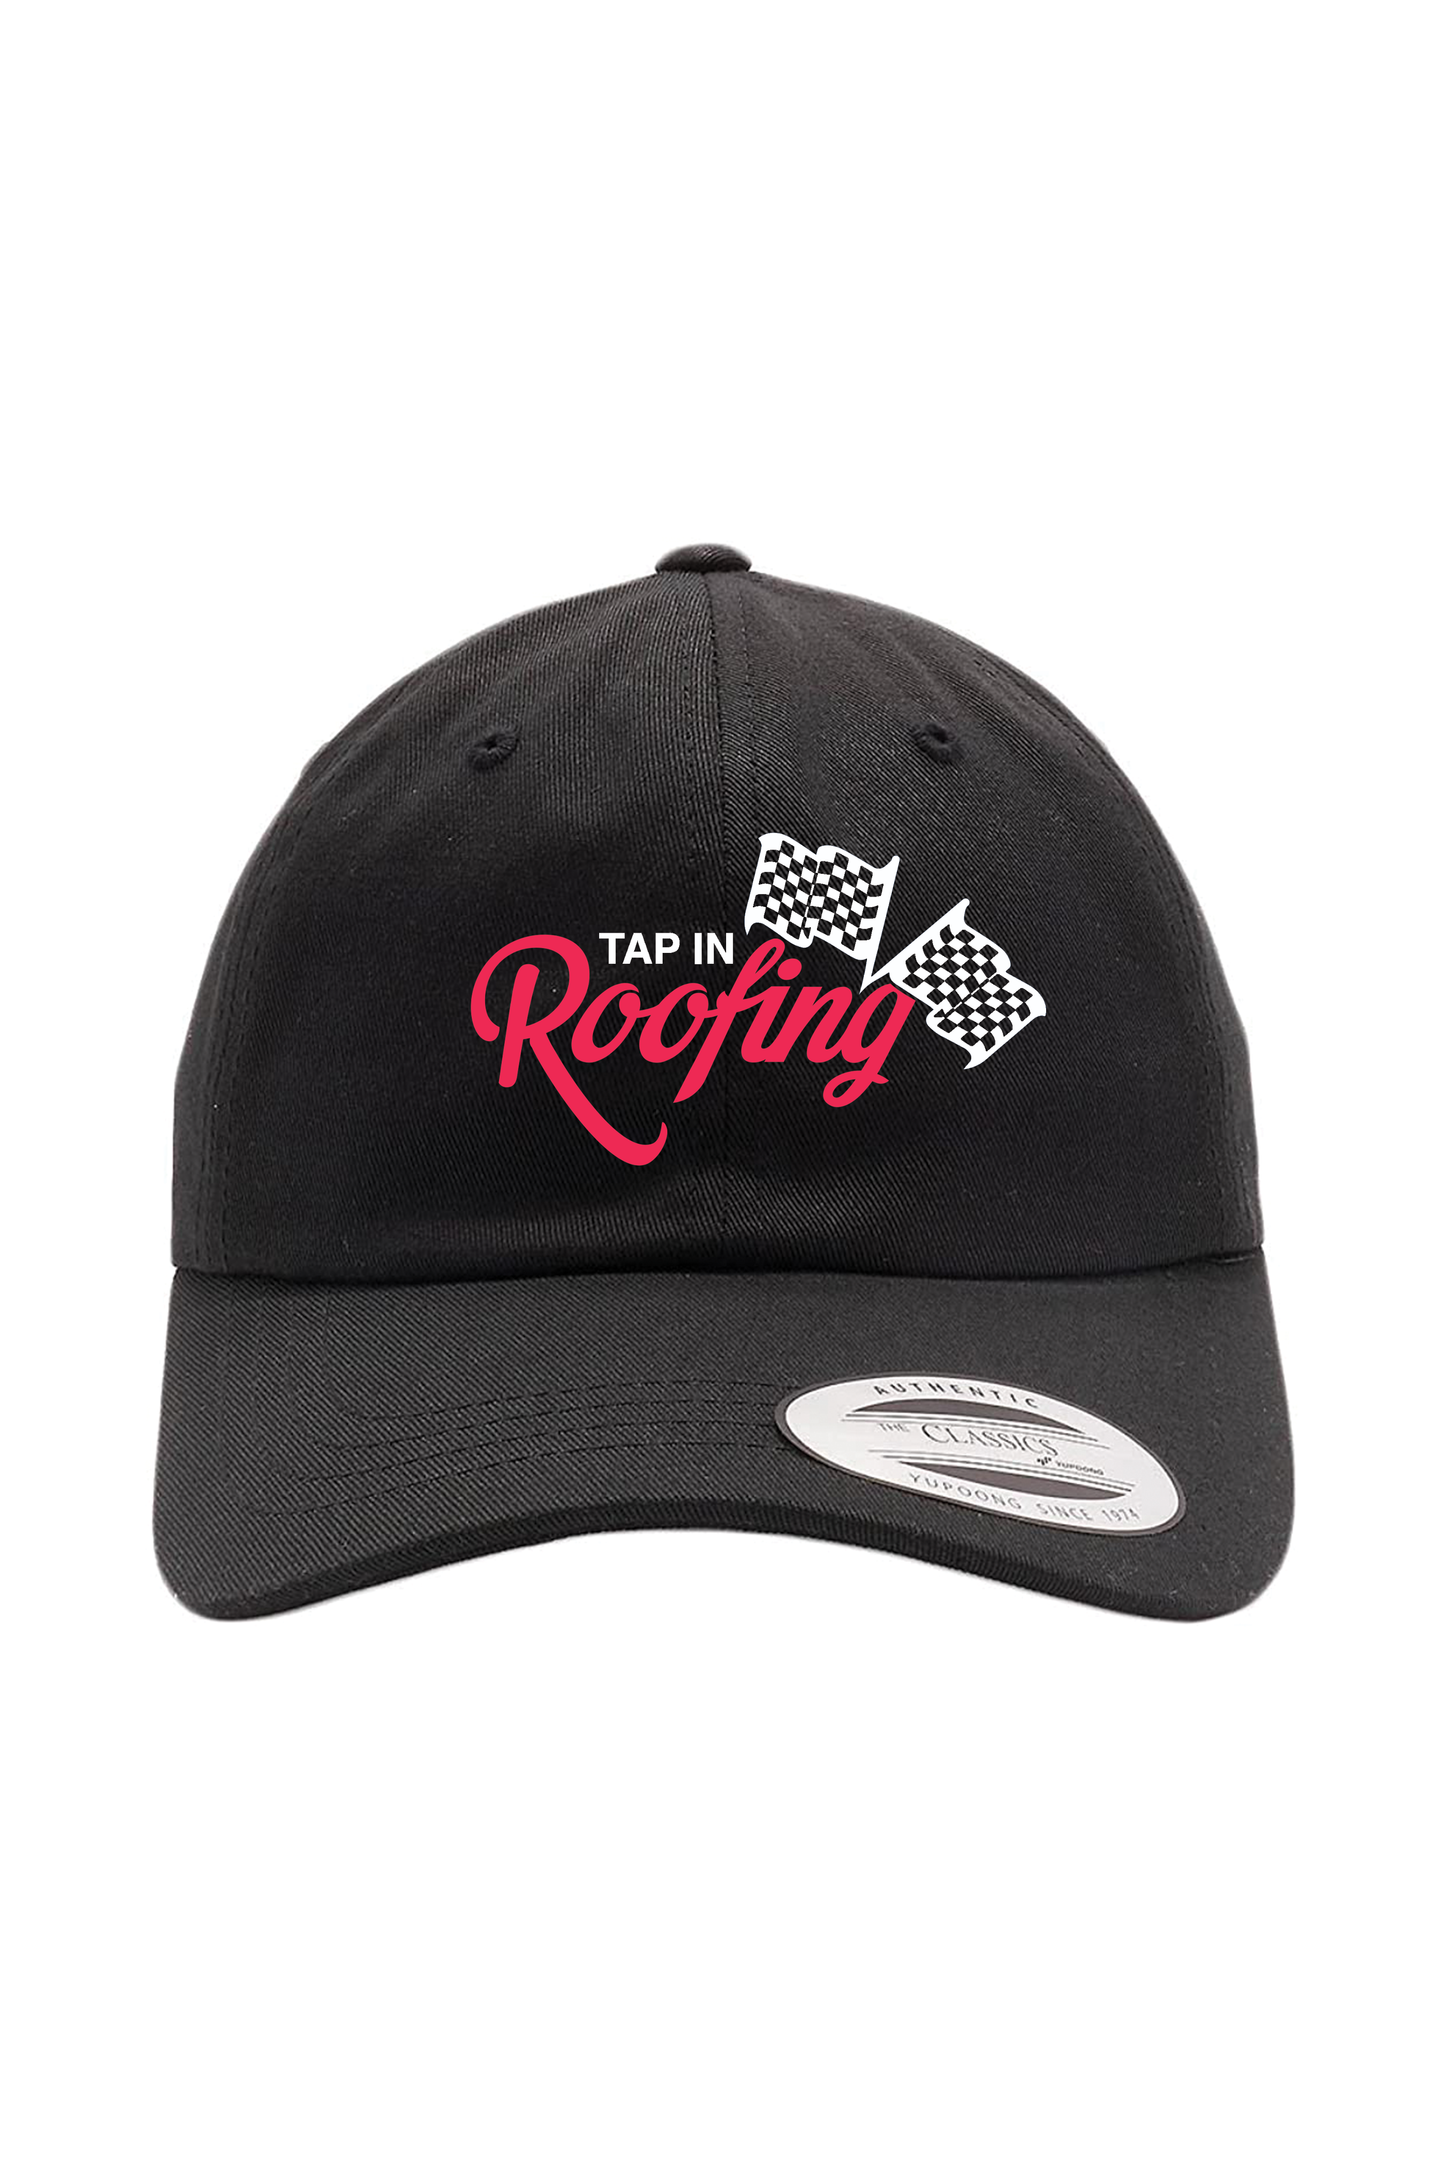 Tap In Roofing Hat